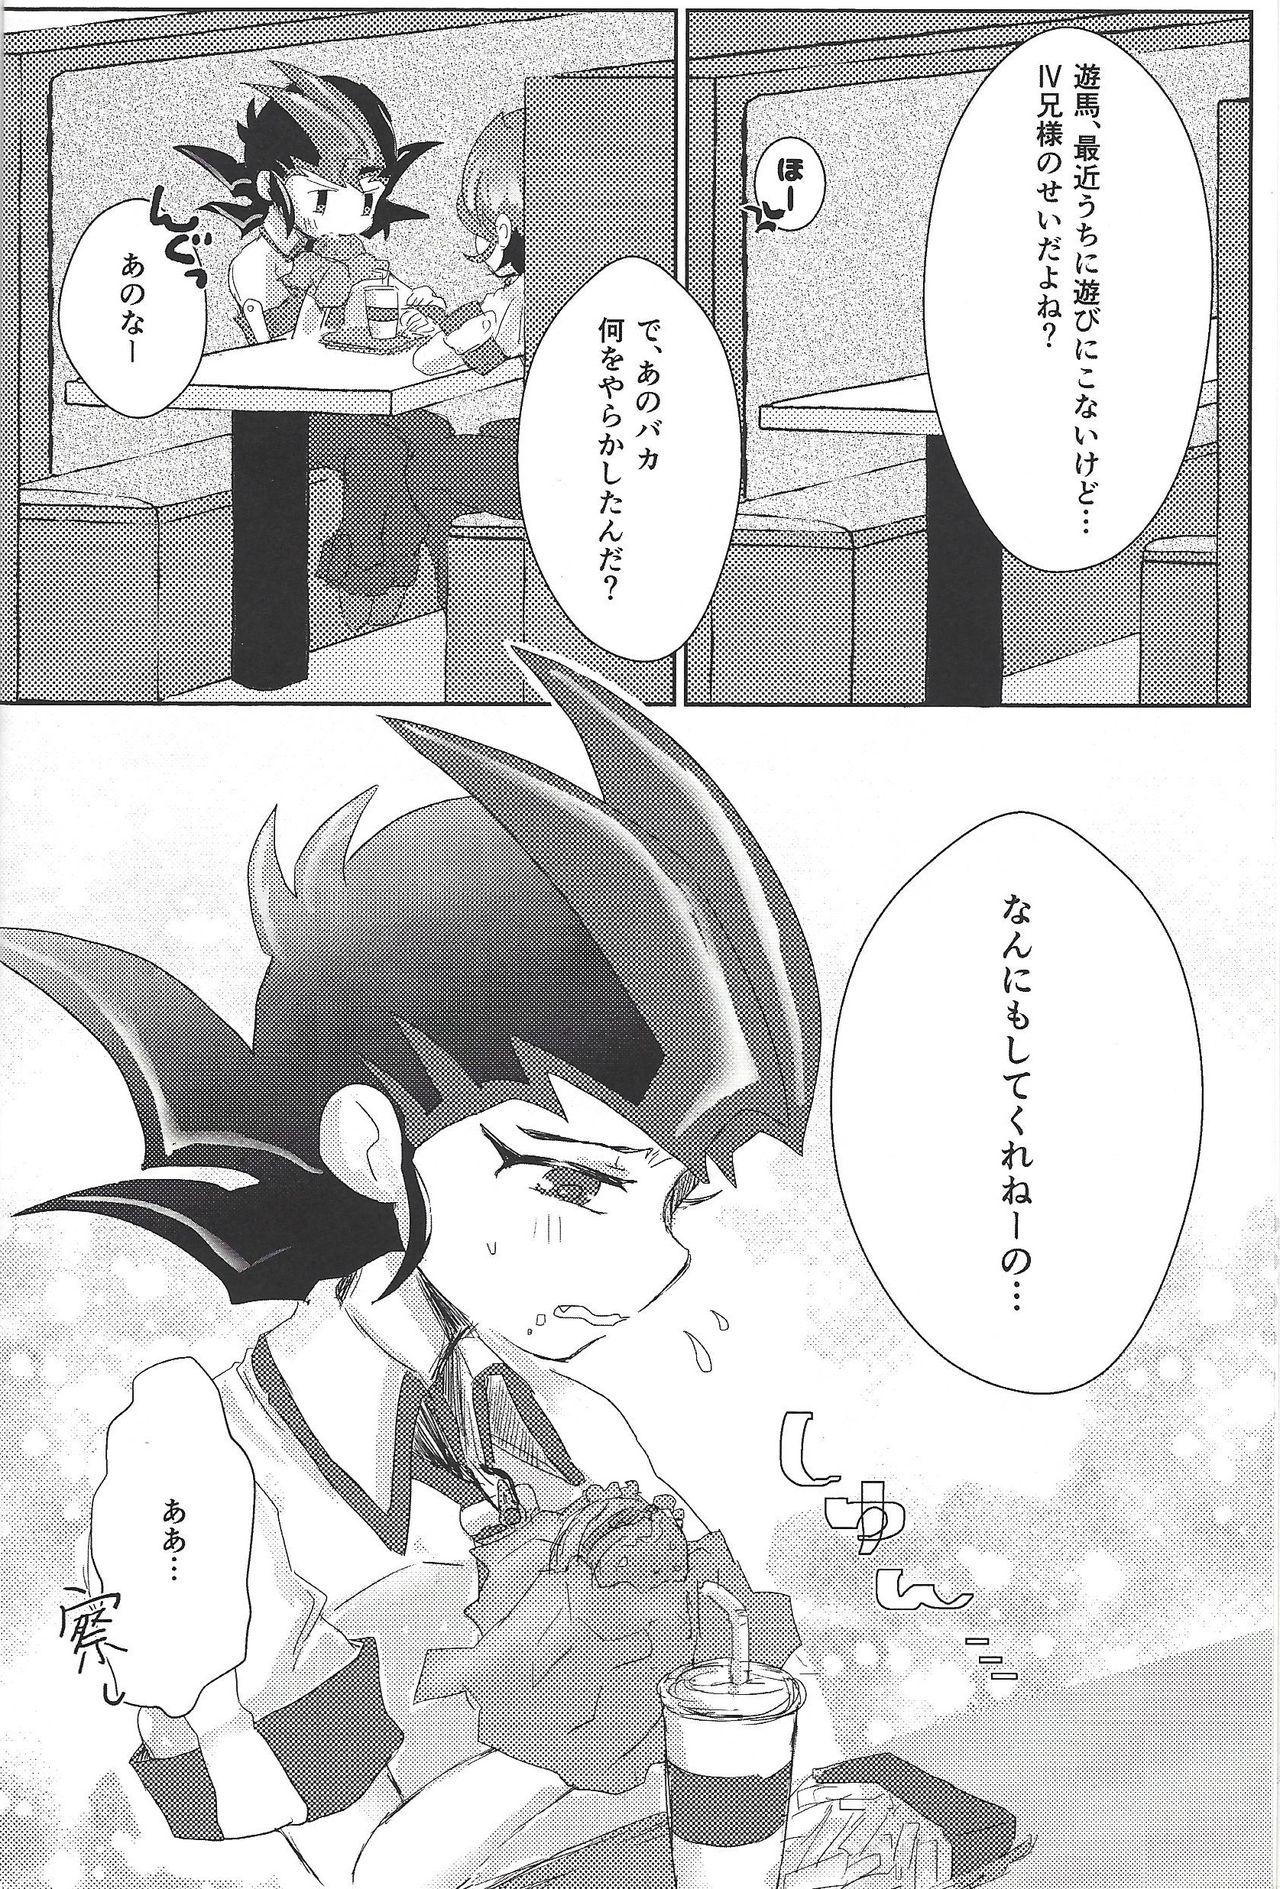 Amateur Weekend For You - Yu gi oh zexal Deep - Page 11